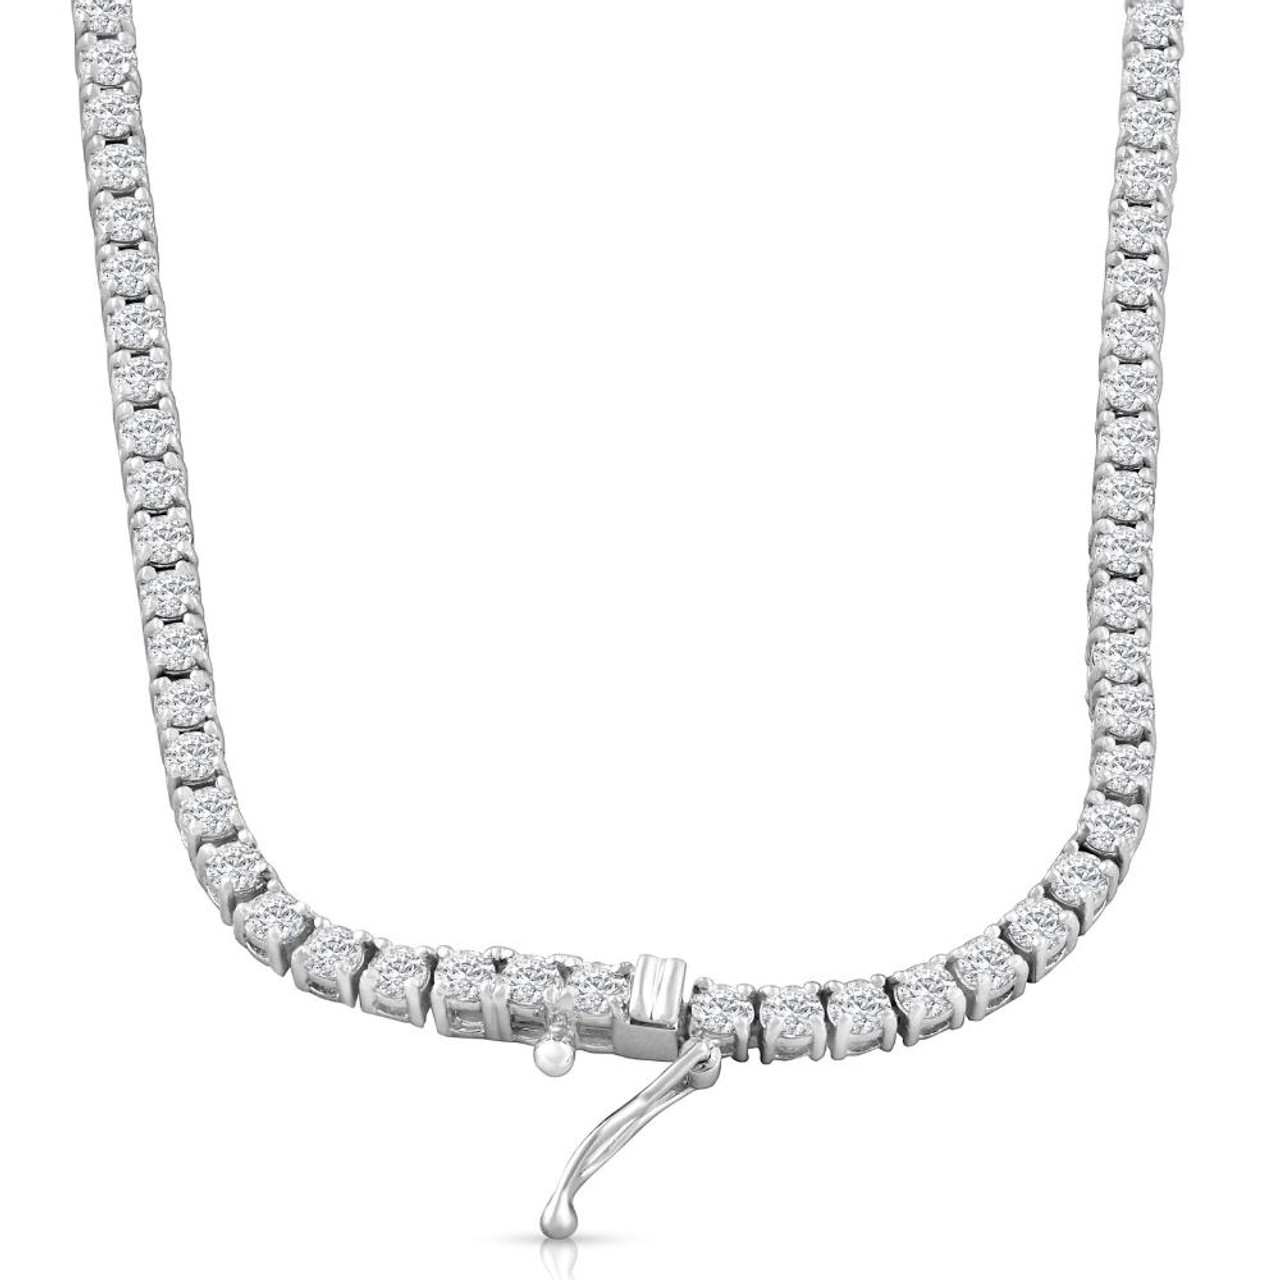 Tennis Necklace 925 Sterling Silver| 2mm Round Cubic Zirconia Cut Faux Diamond  Tennis Chain for Women and Men Bridal Wedding Jewelry 16 inches | Amazon.com